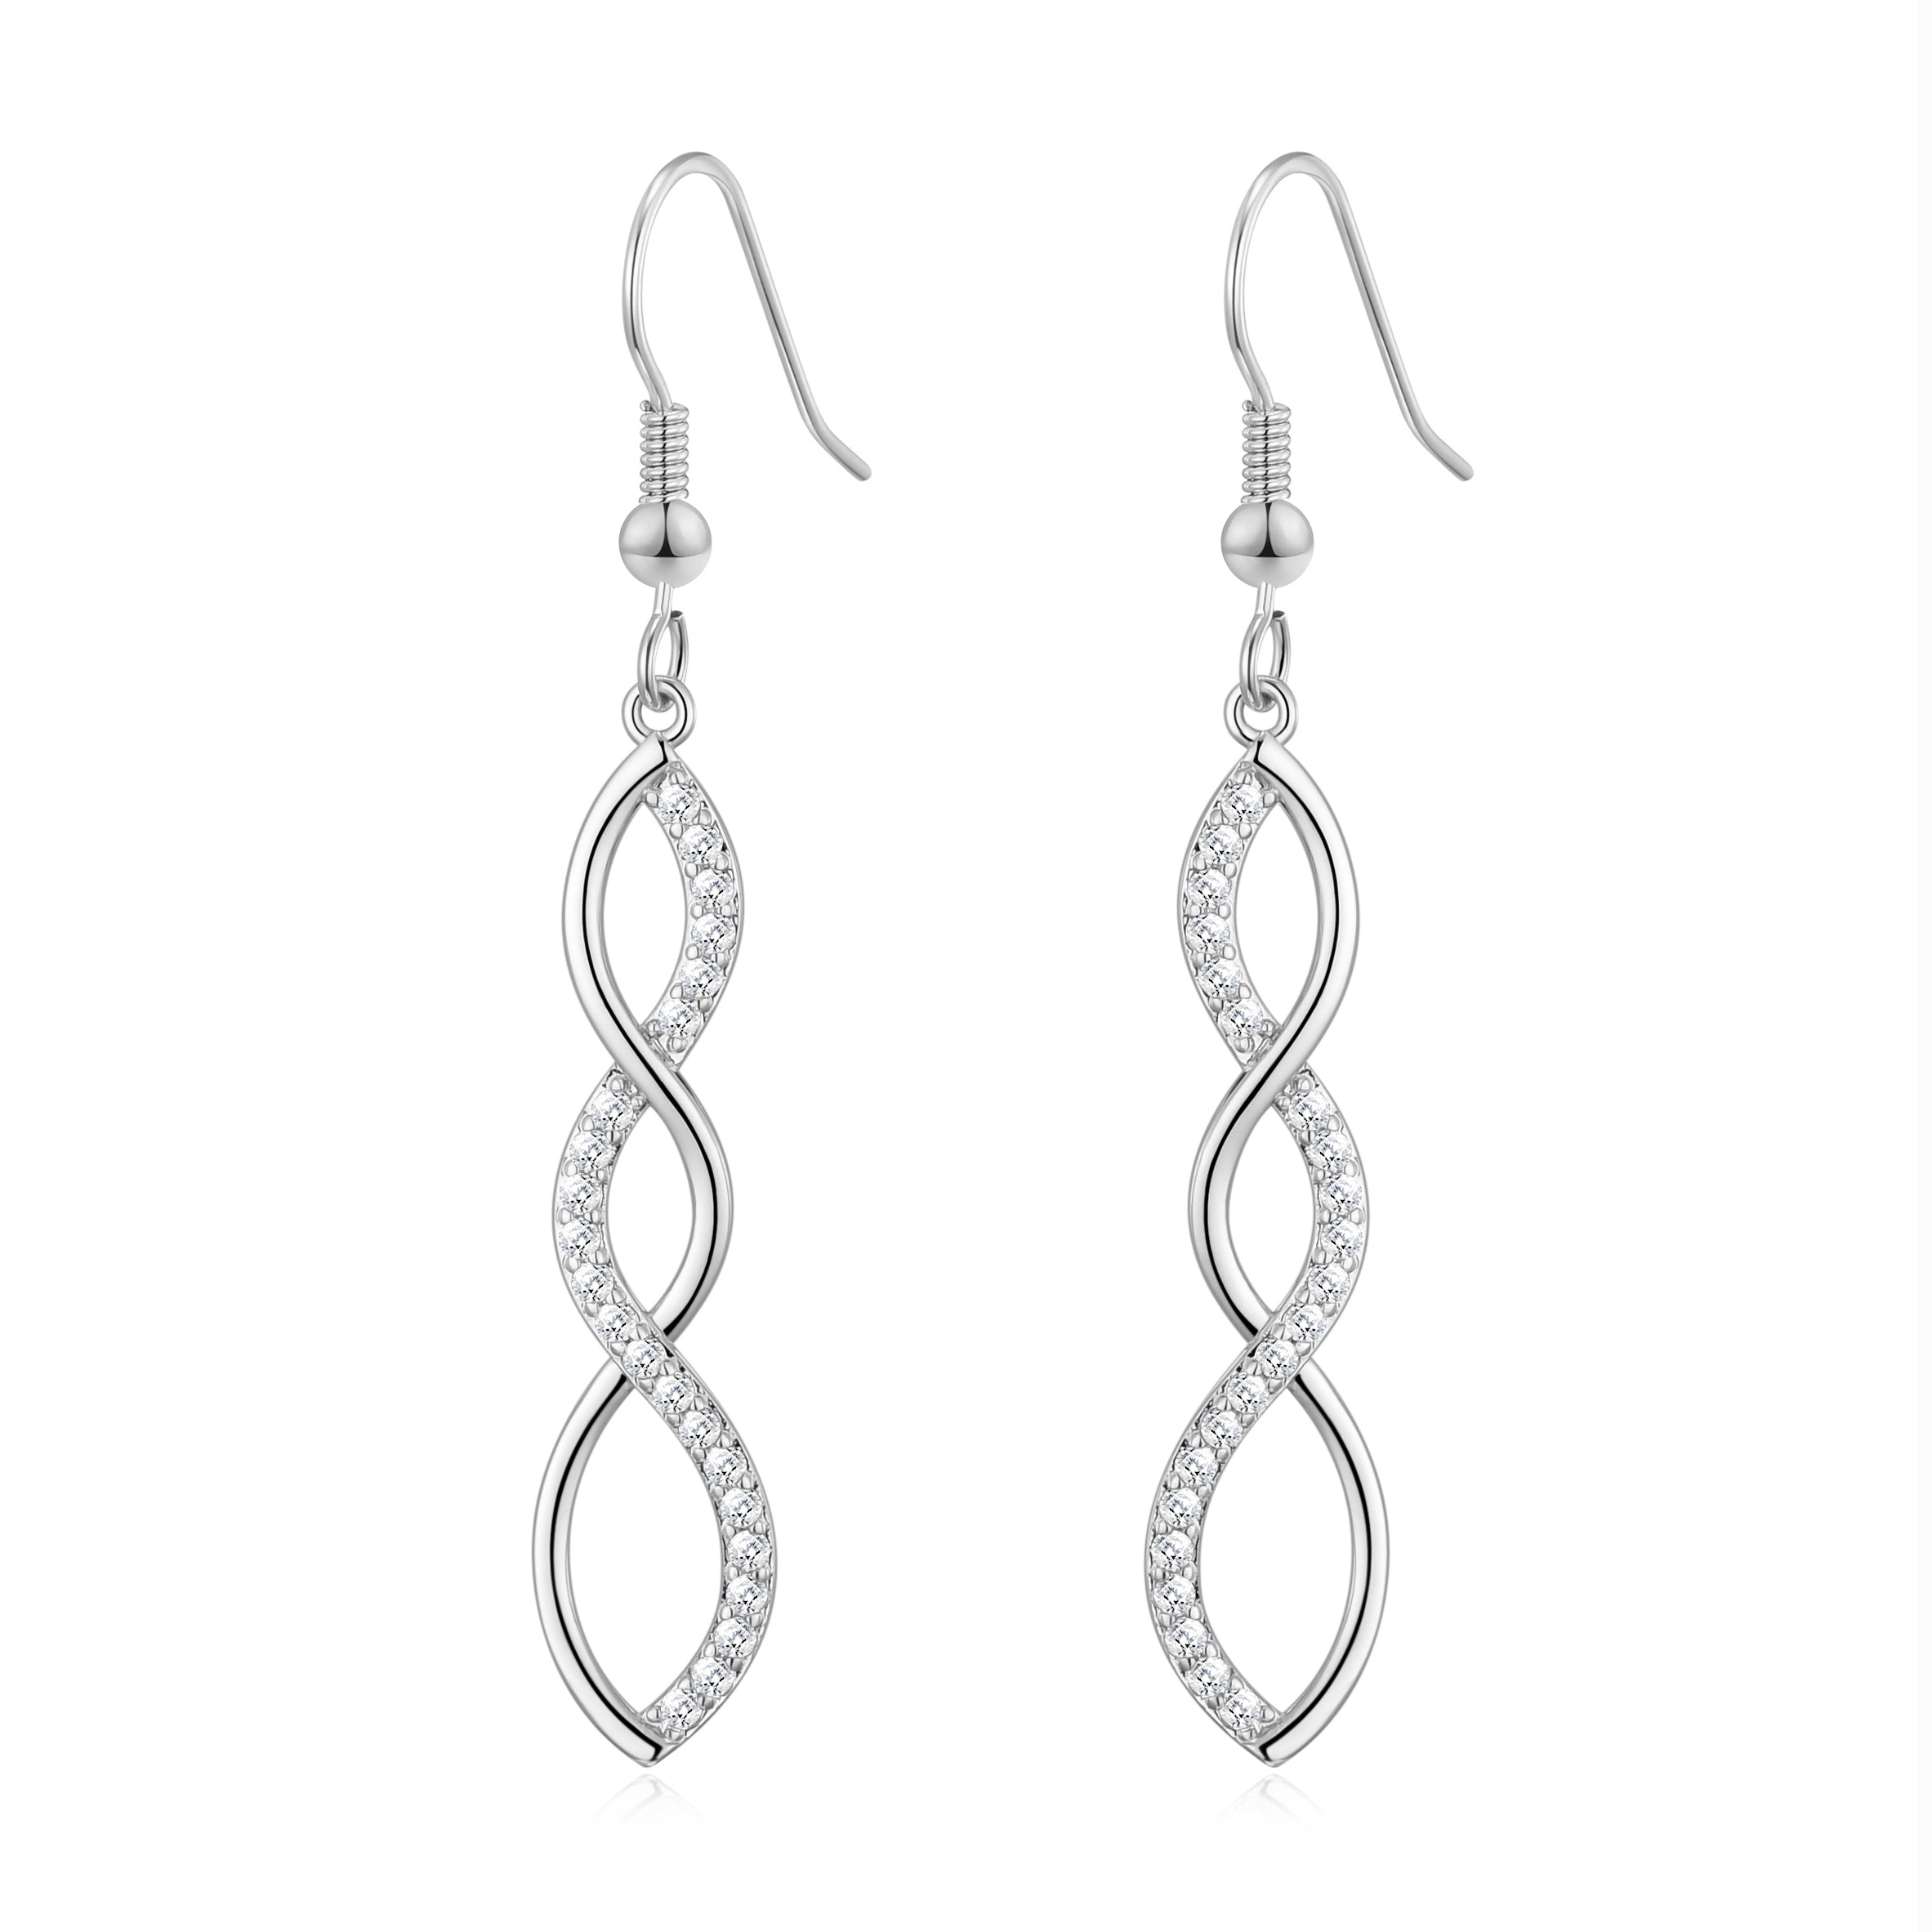 Silver Plated Twist Drop Earrings Created with Zircondia® Crystals by Philip Jones Jewellery